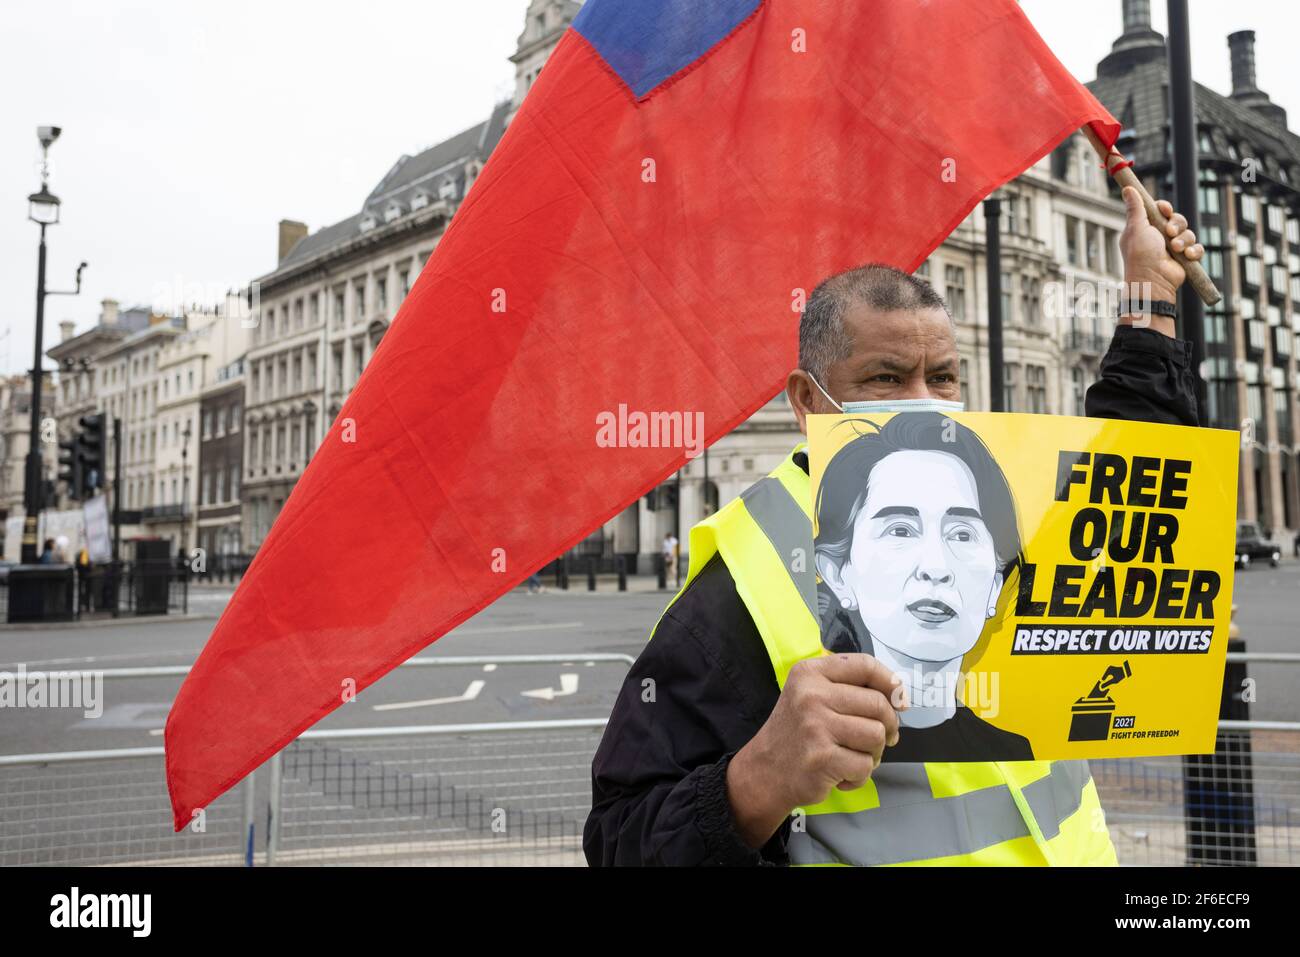 London, UK. 31st Mar, 2021. A protester with a flag and placard reading 'Free our Leader. Respect our Votes' in Parliament Square. Protesters gathered in Parliament Square - wearing face masks and observing social-distancing - before marching to the Chinese Embassy in solidarity with the people of Myanmar against the military coup and state killings of civilians. Speeches were given outside the embassy. Since the beginning of the military coup on the 1st of February over 520 people have been killed in Myanmar by security forces. Last Saturday was the most violent day when more than 100 people Stock Photo